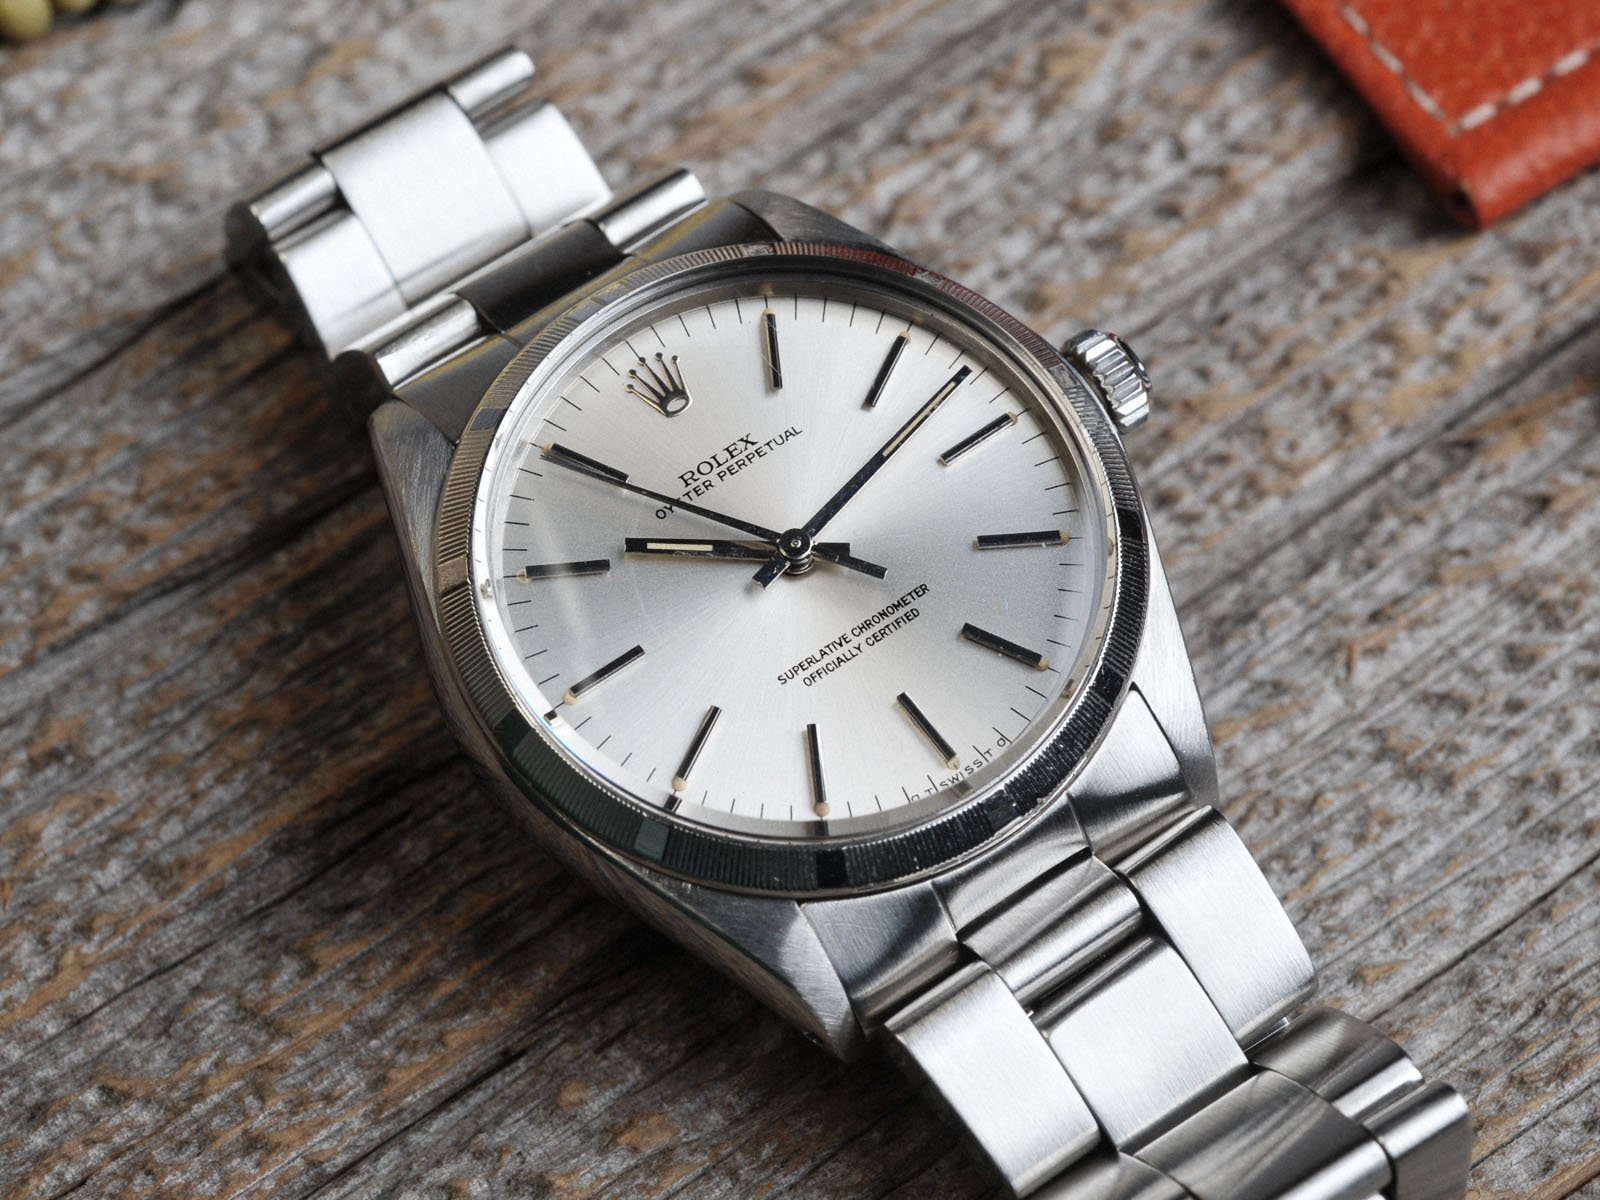 ROLEX 1003 OYSTER PERPETUAL